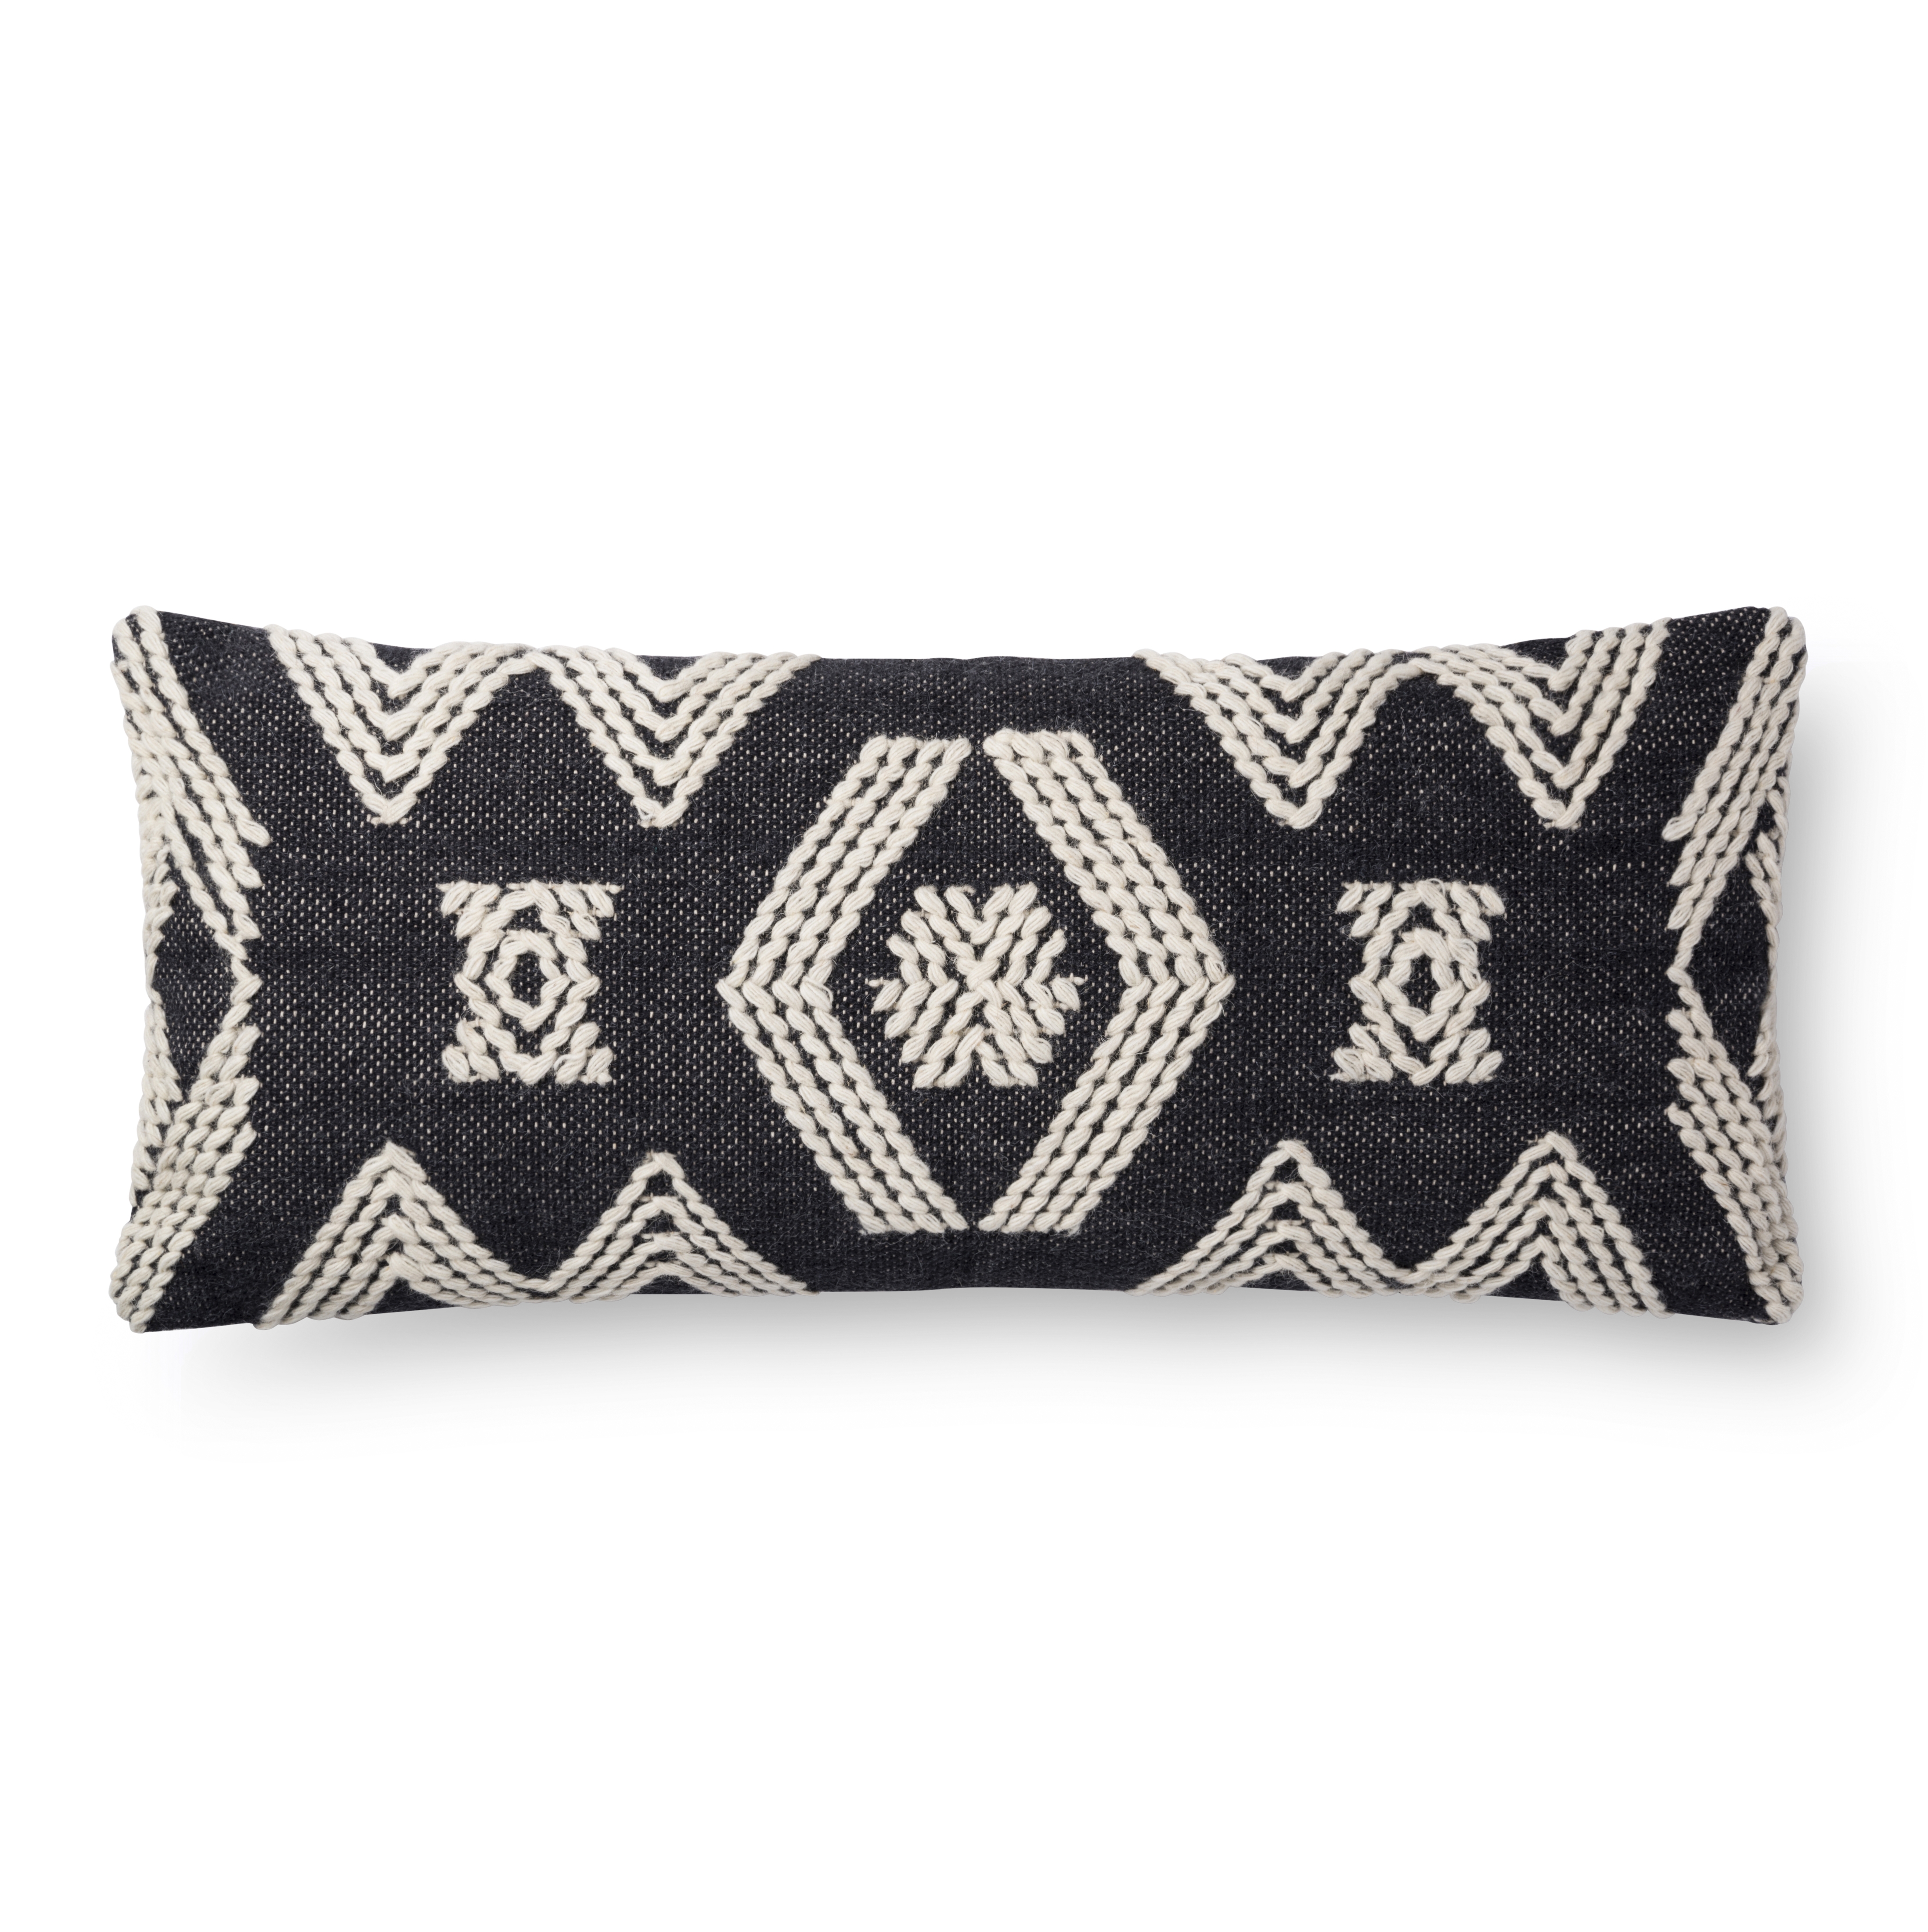 Magnolia Home by Joanna Gaines PILLOWS P1105 INDIGO / IVORY 13" x 35" Cover Only - Image 1